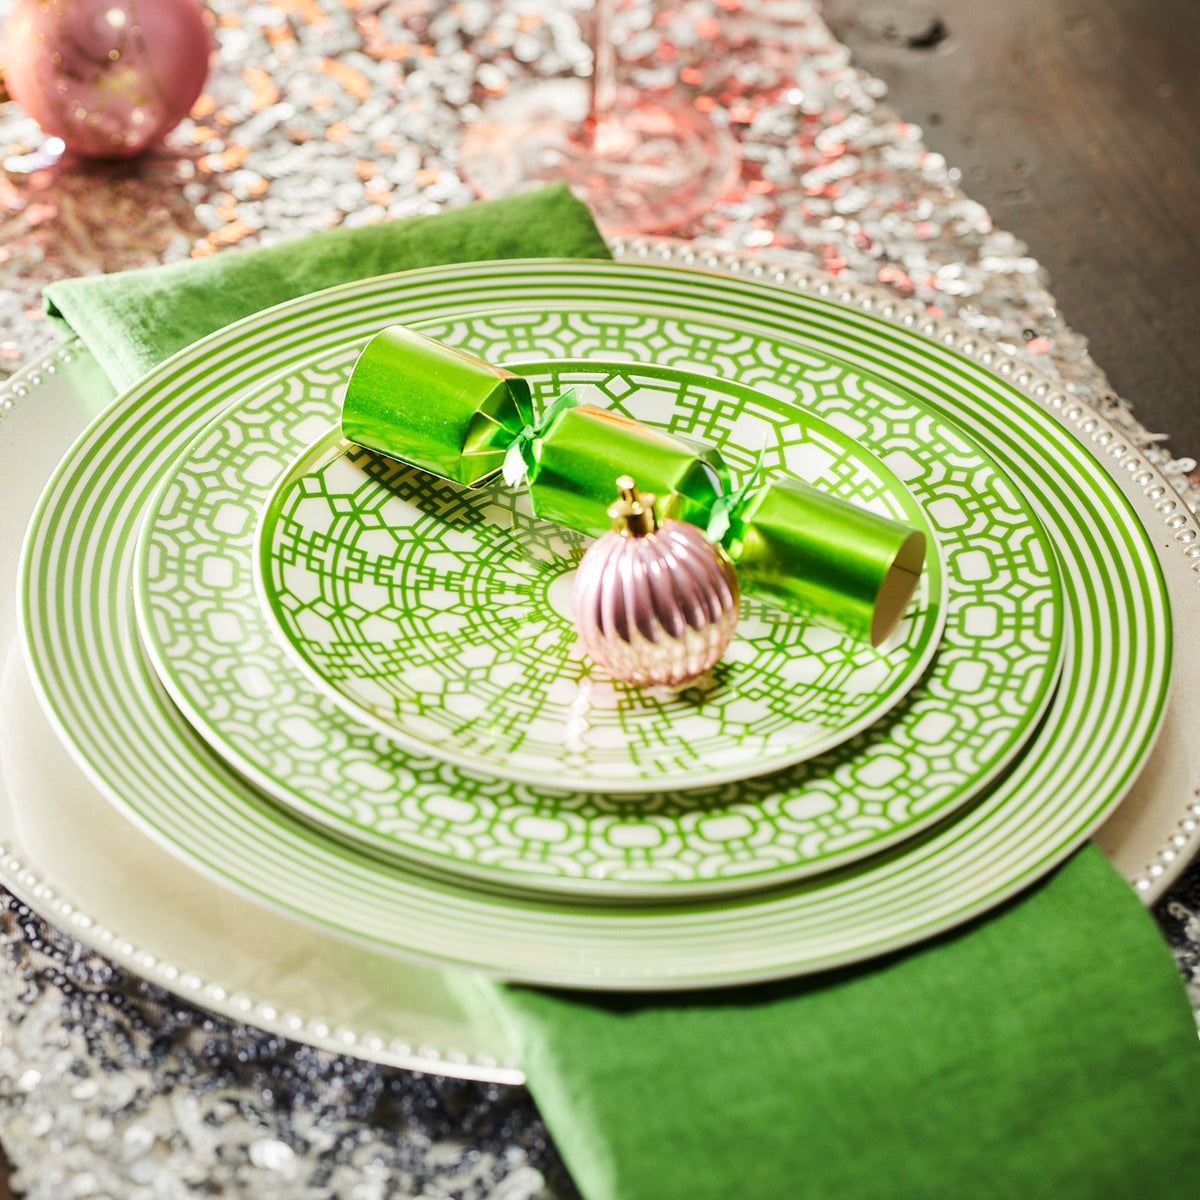 A Newport Green Canapé Plate by Caskata Artisanal Home with a Christmas ornament on it.